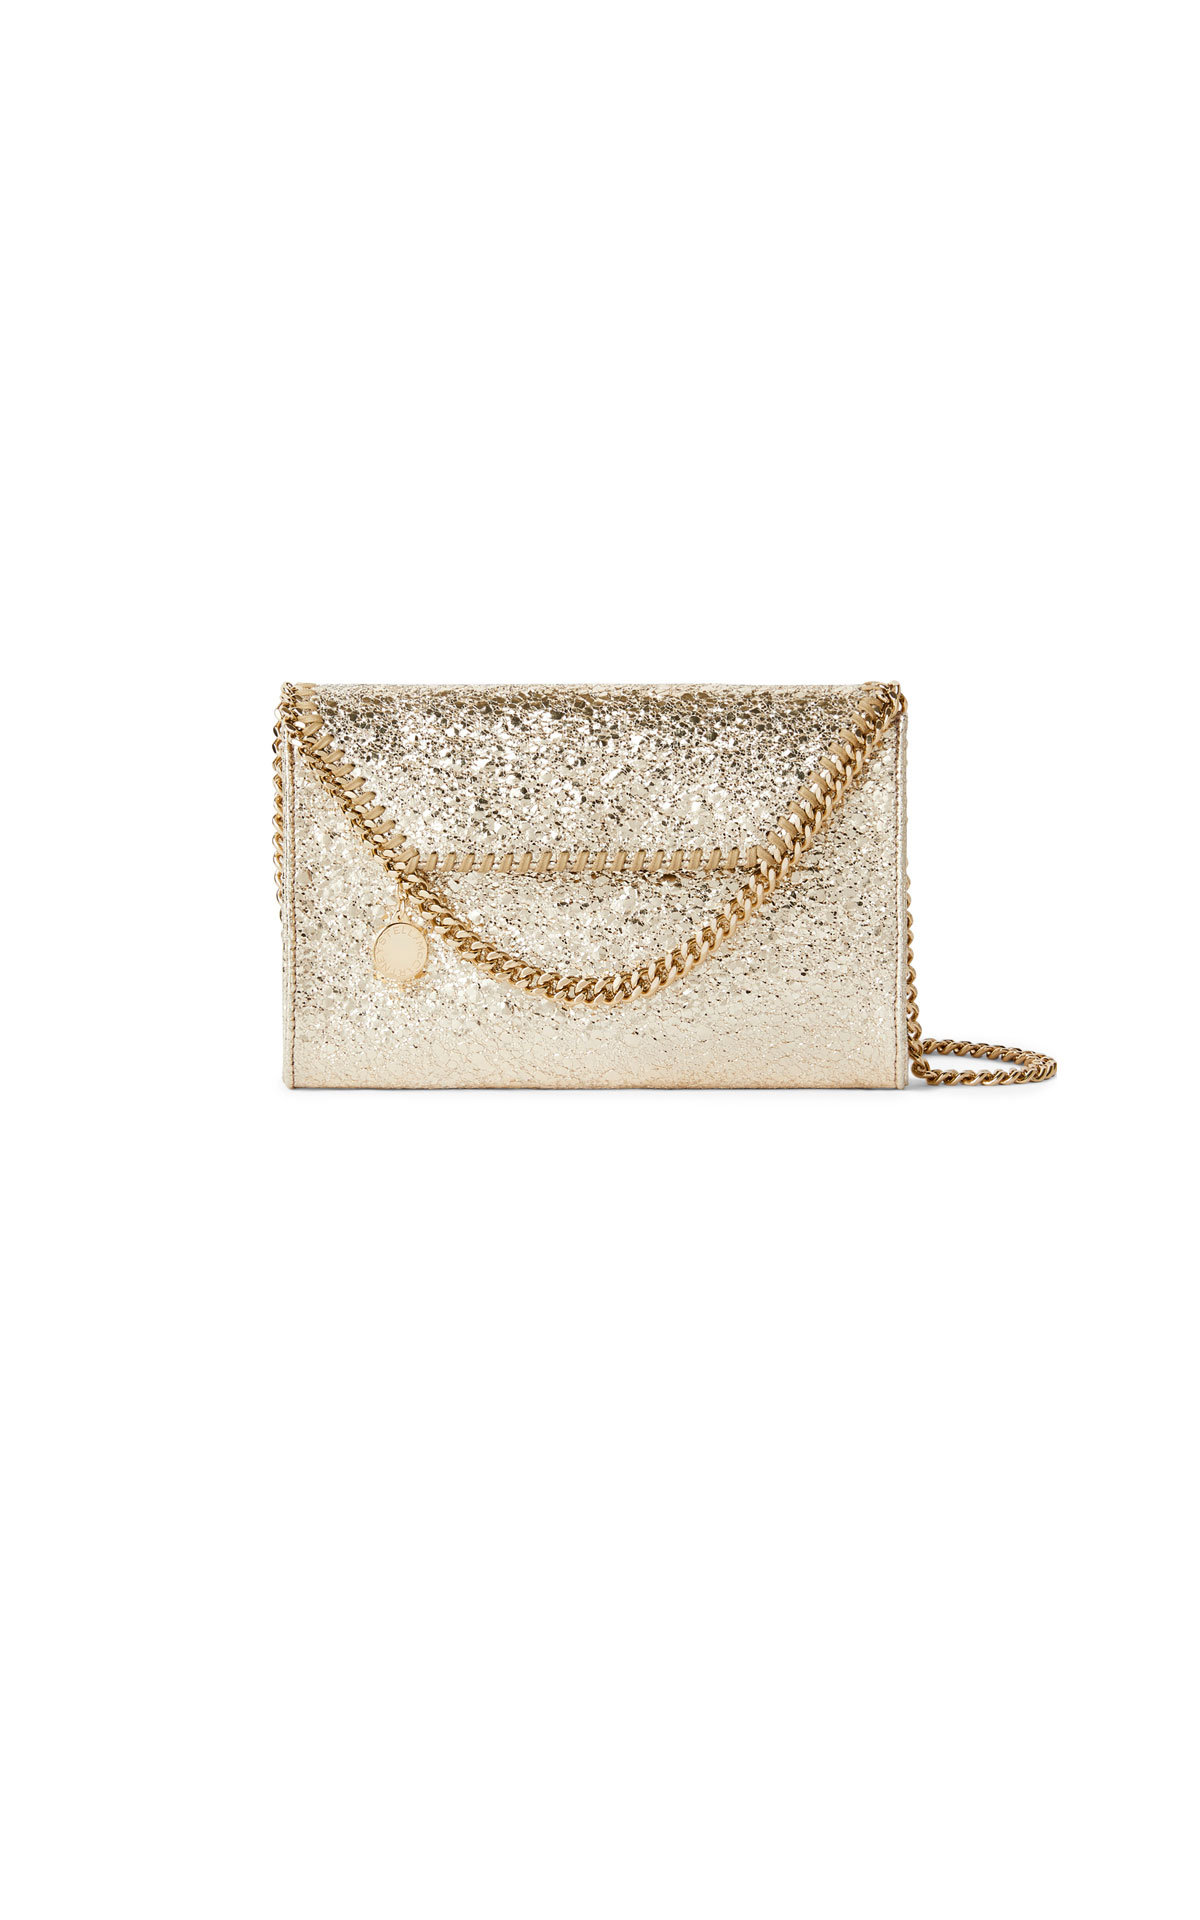 Stella McCartney Cracked gold tiny flap crossbody falabella from Bicester Village